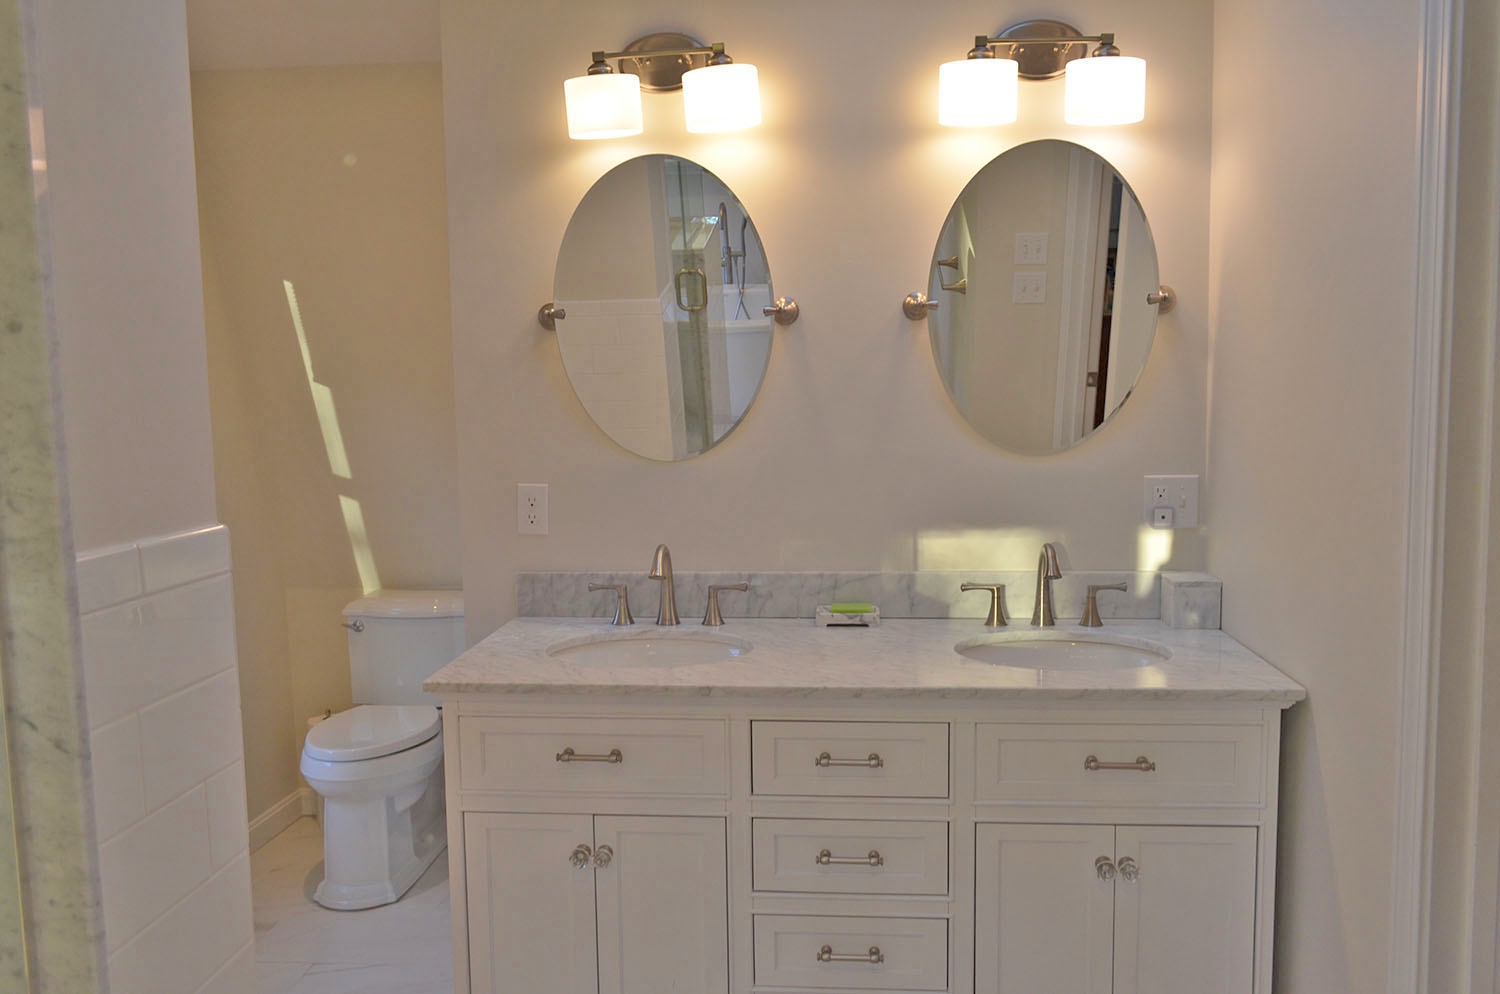 The generously-sized Master bath has a double vanity.